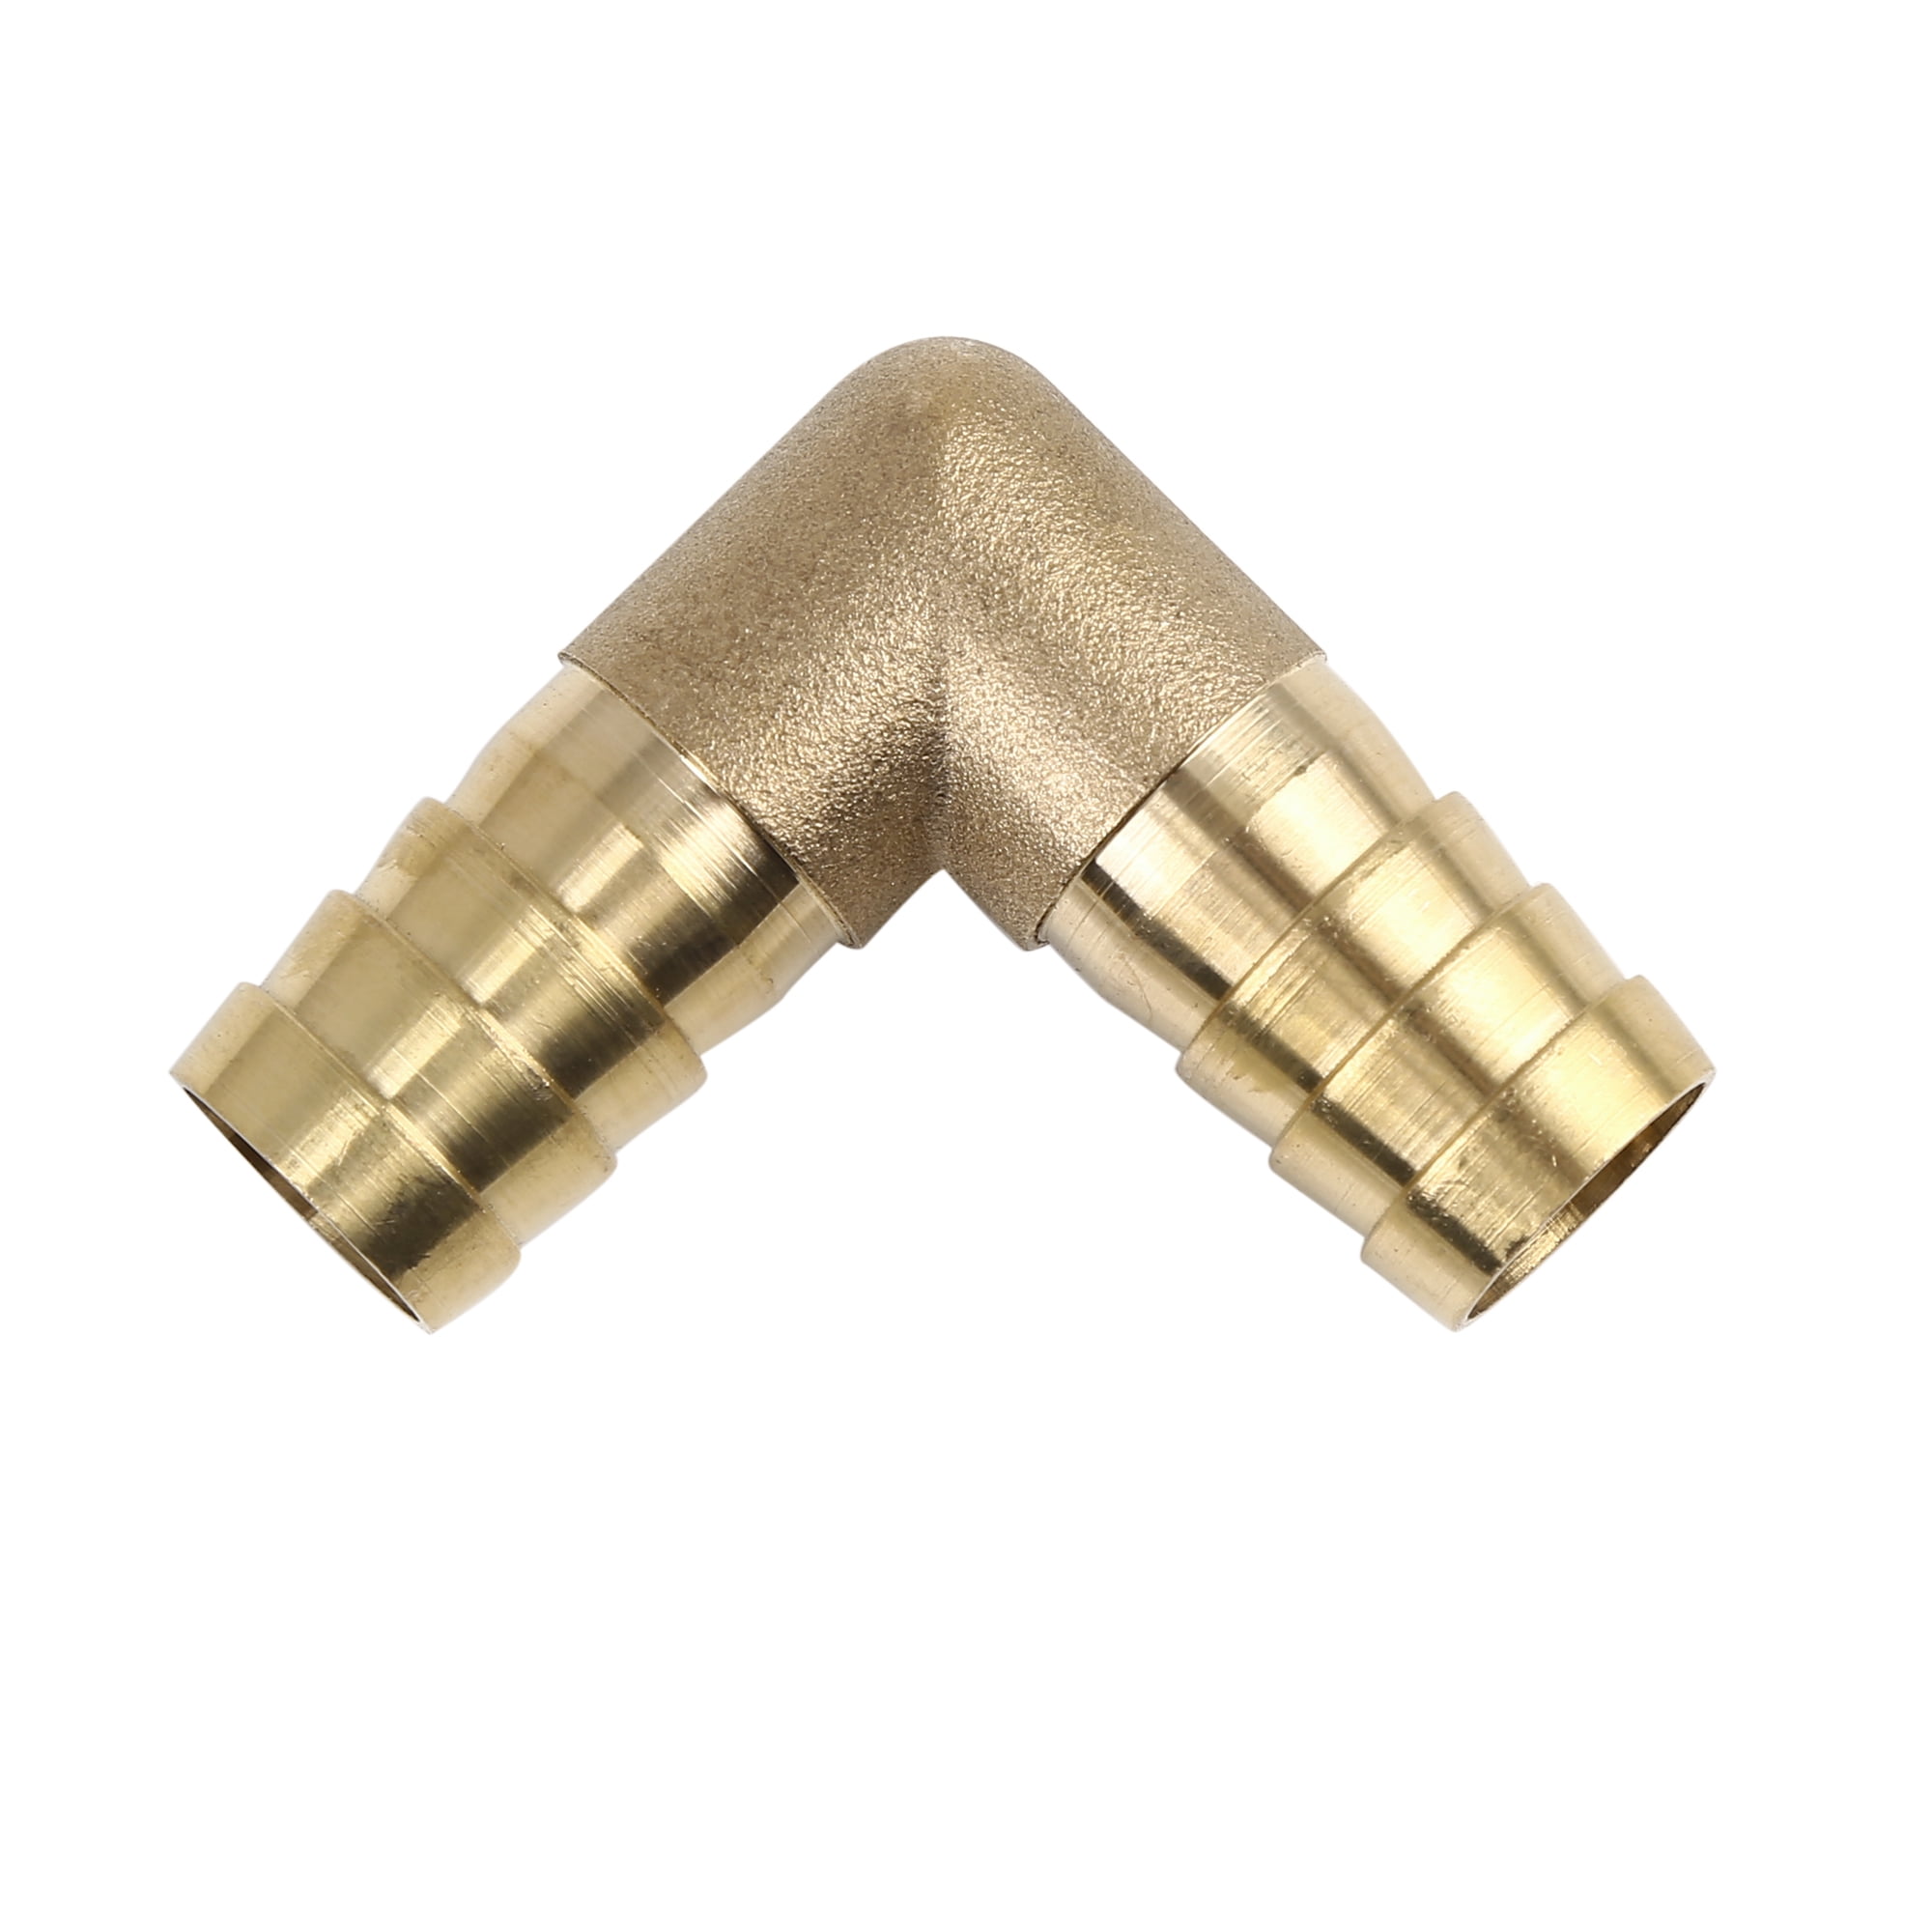 90° Elbow Brass Male Thread Fitting x Barb Hose Tail End Connector For Air Fuel 